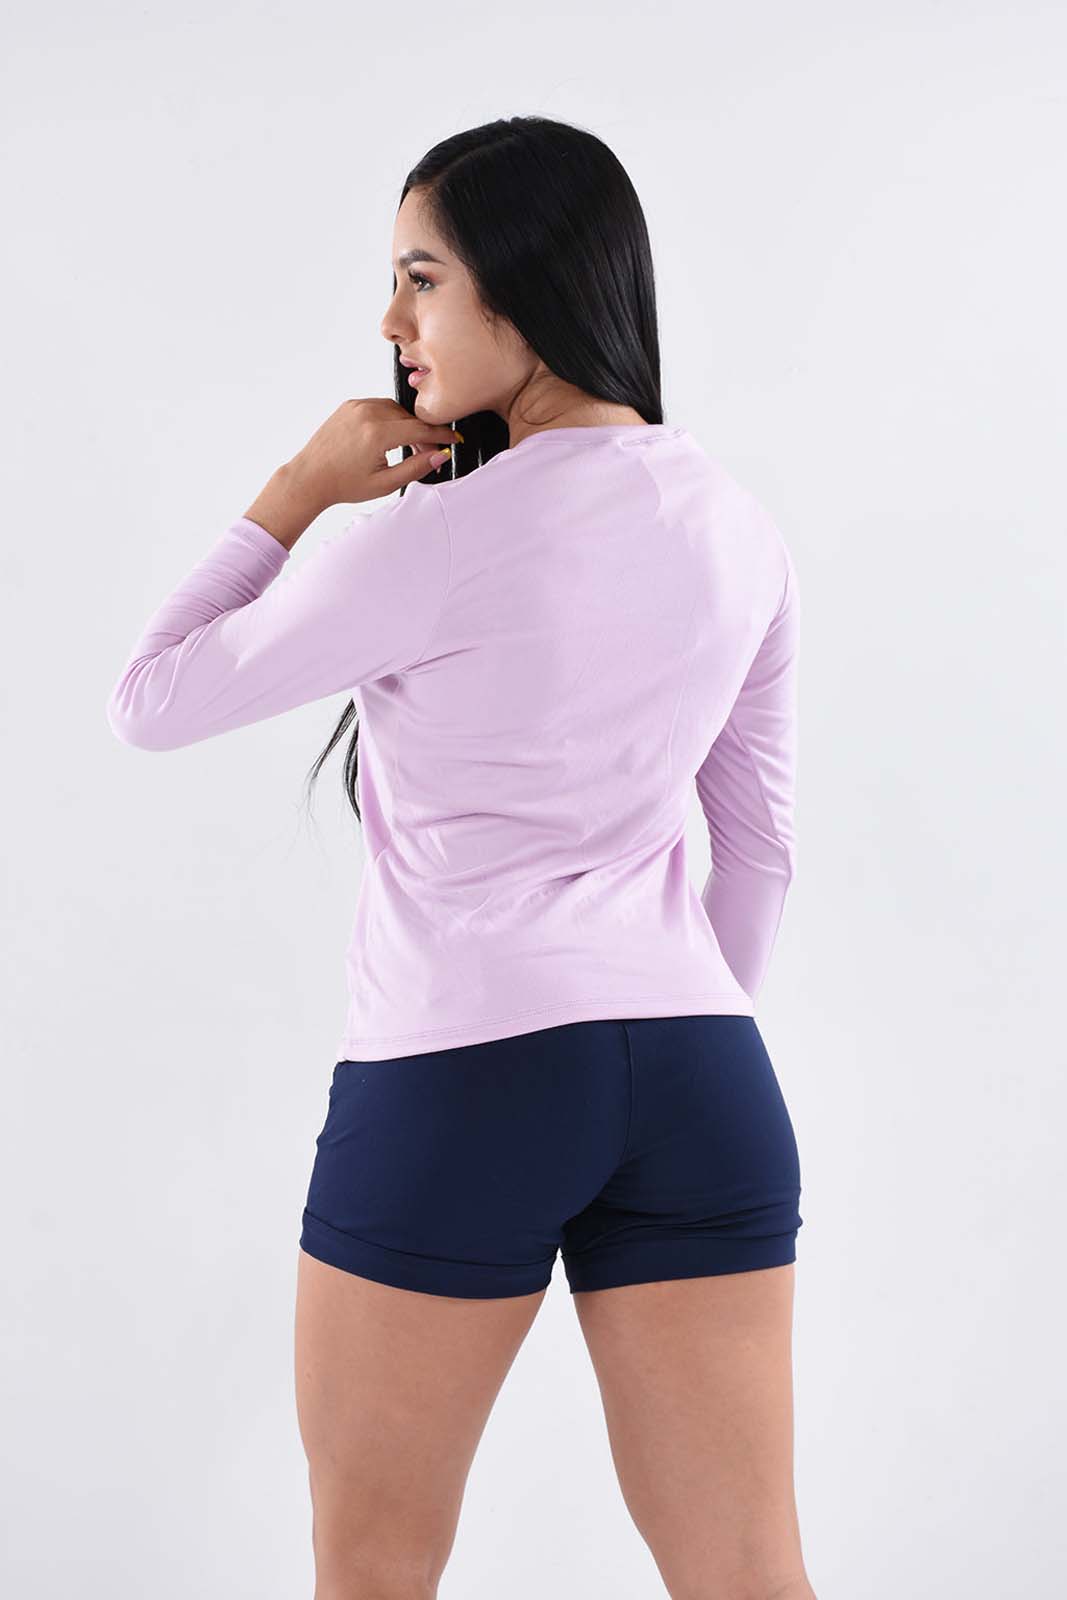 Galaxy Commerce - Blusa para Mujer marca Chica Chic GB0024